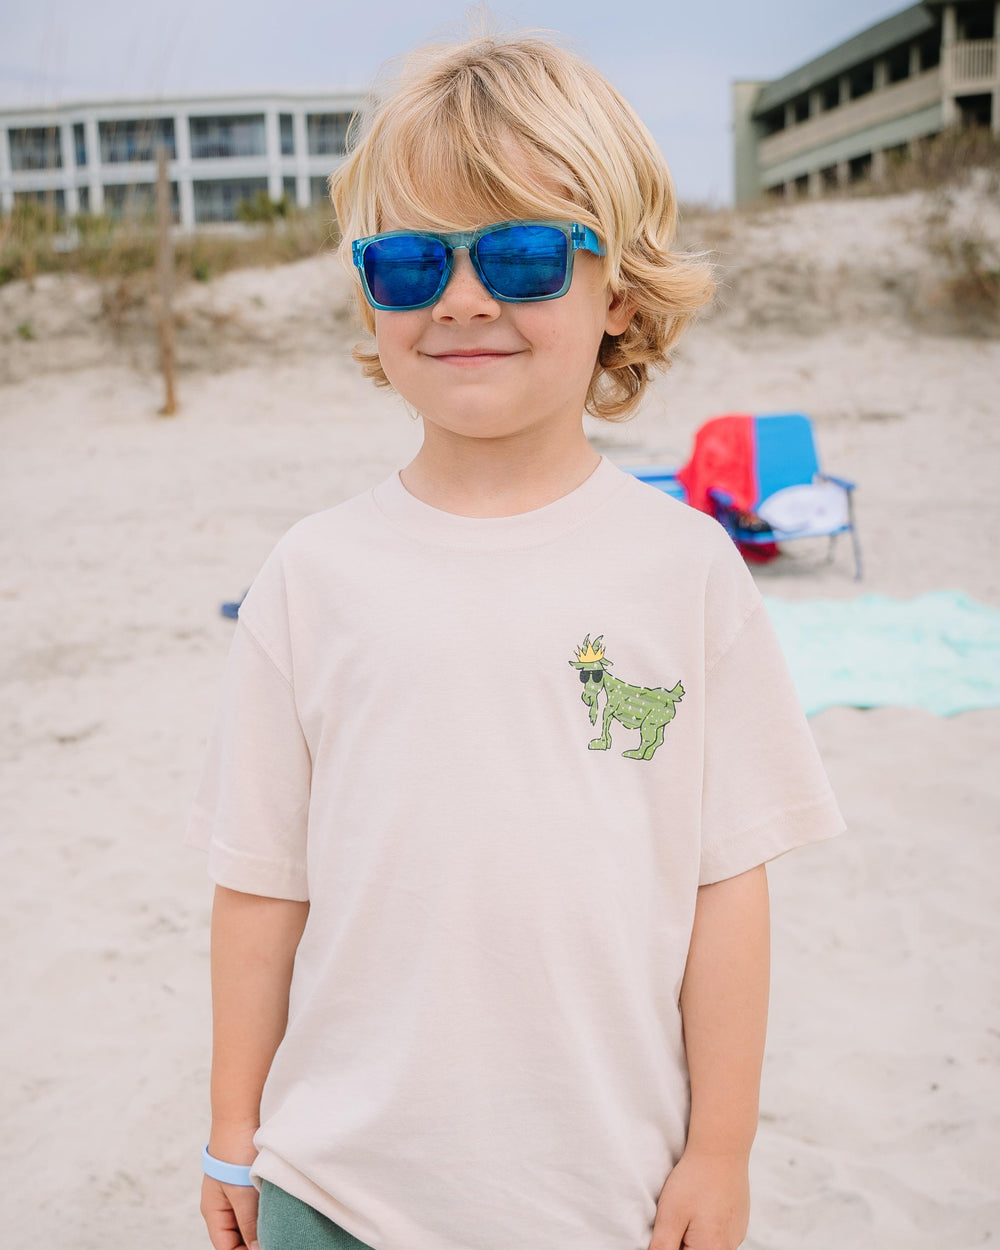 Kid with sunglasses smiling on beach